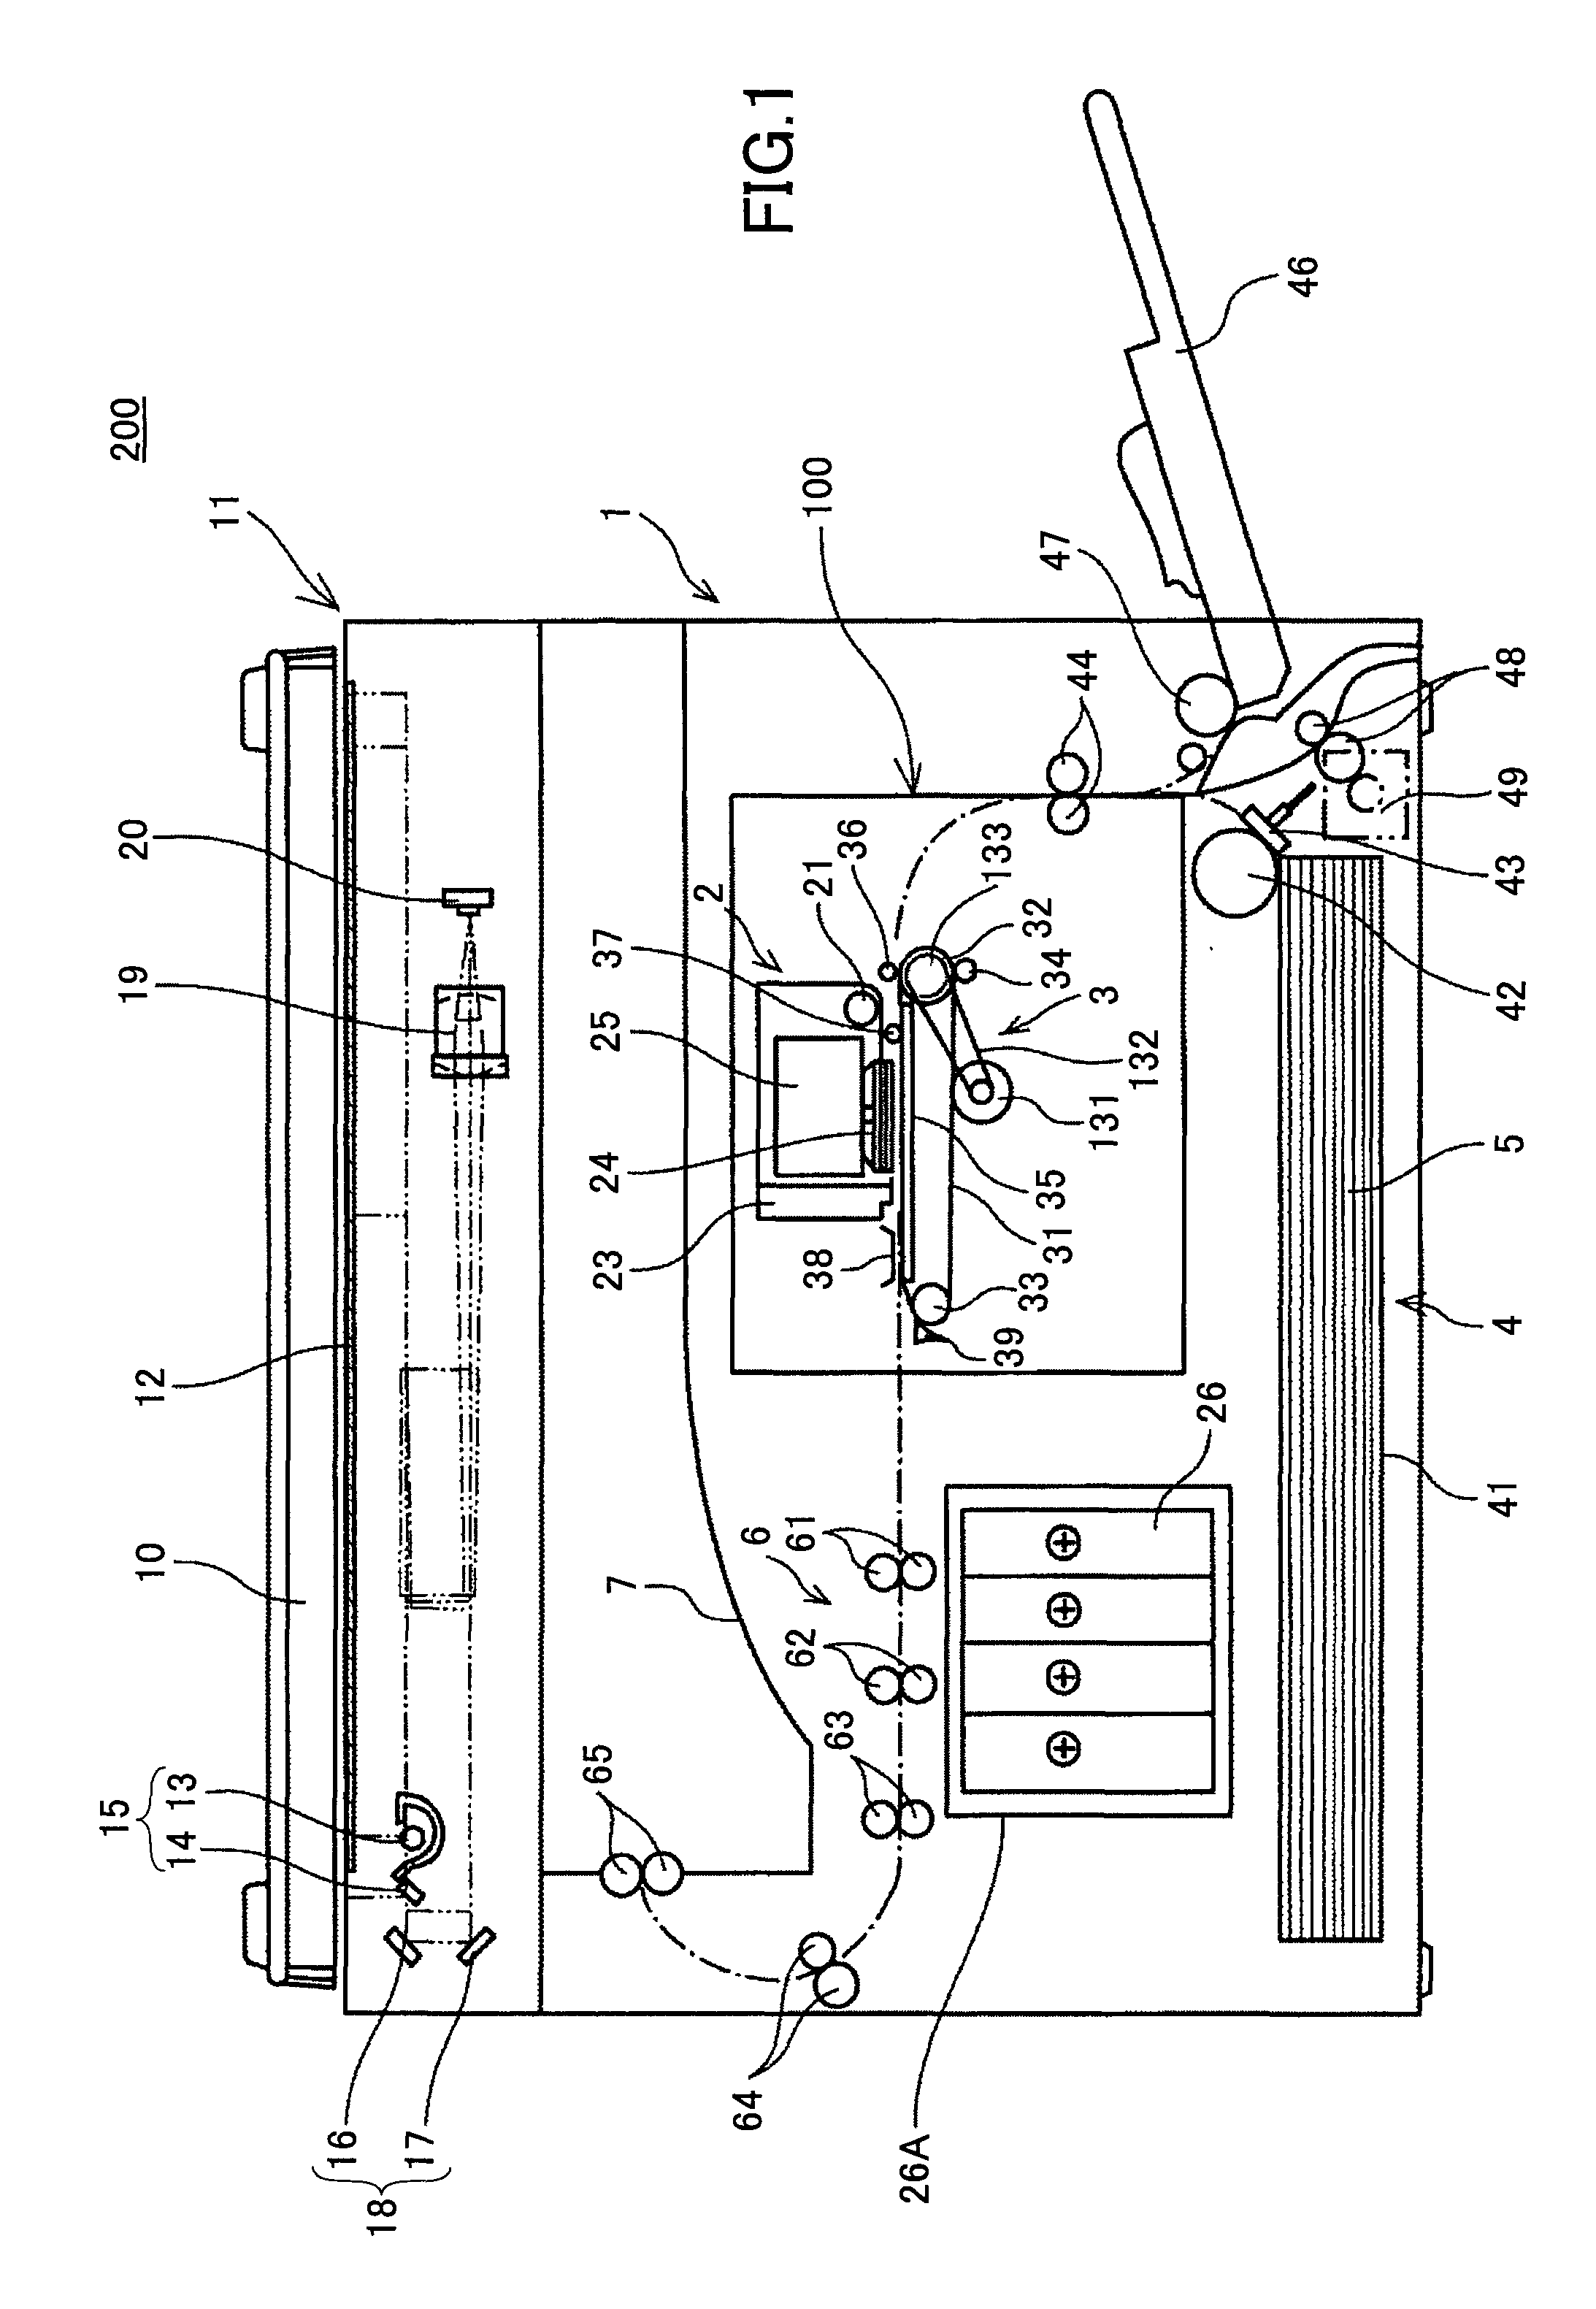 Liquid-jet device, image forming apparatus, and method for adjusting landing positions of liquid droplets